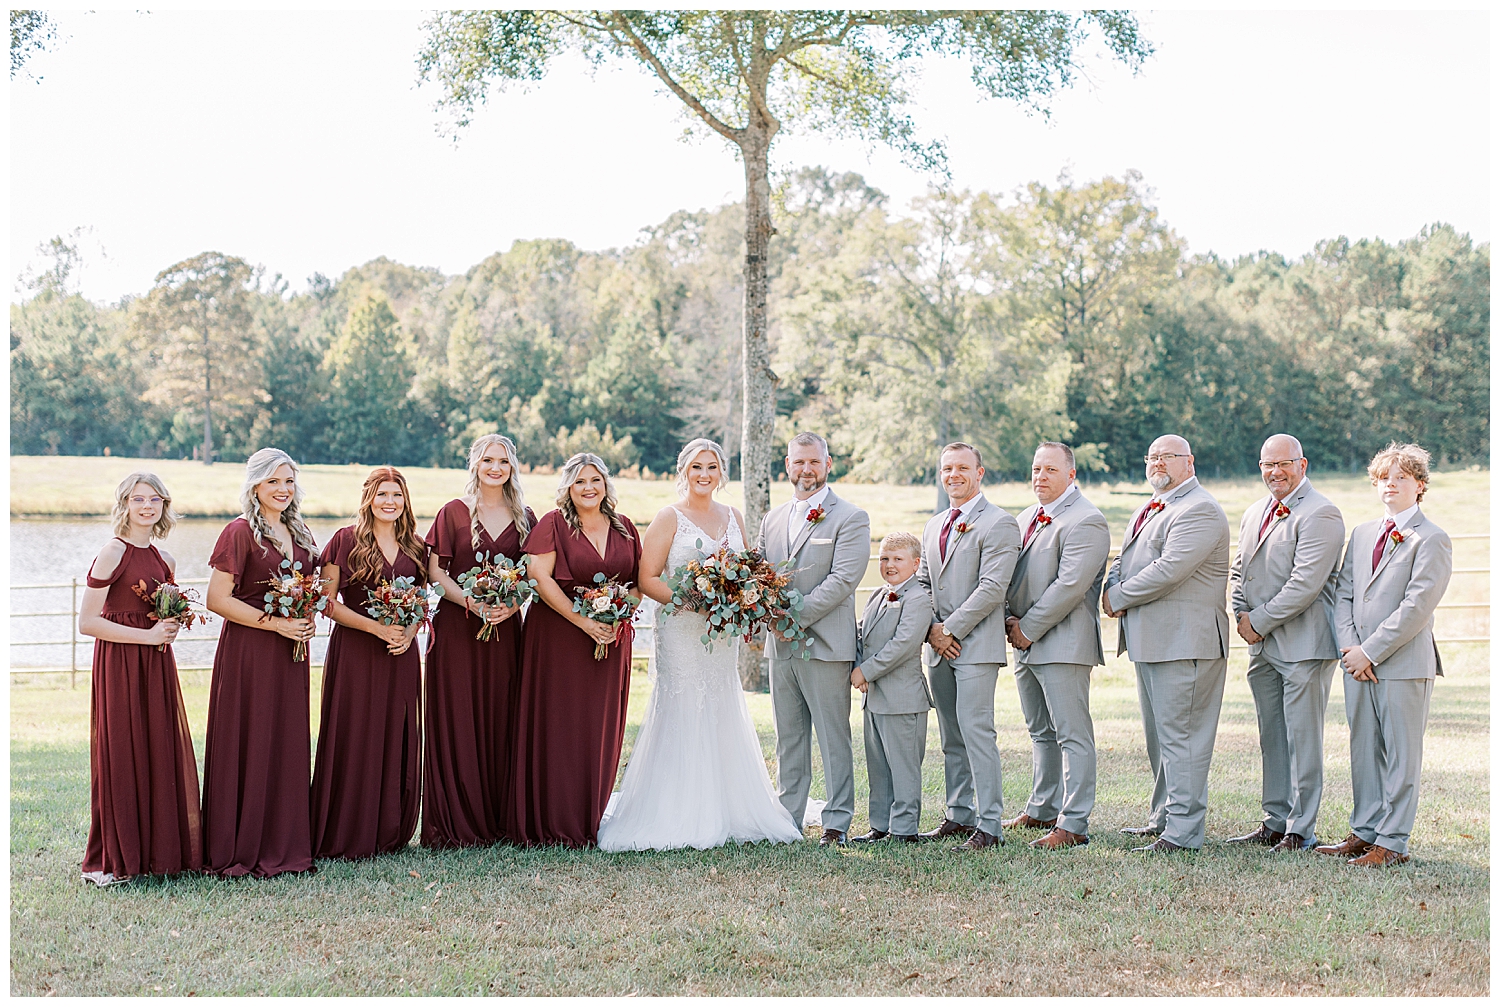 The entire wedding party smiles.